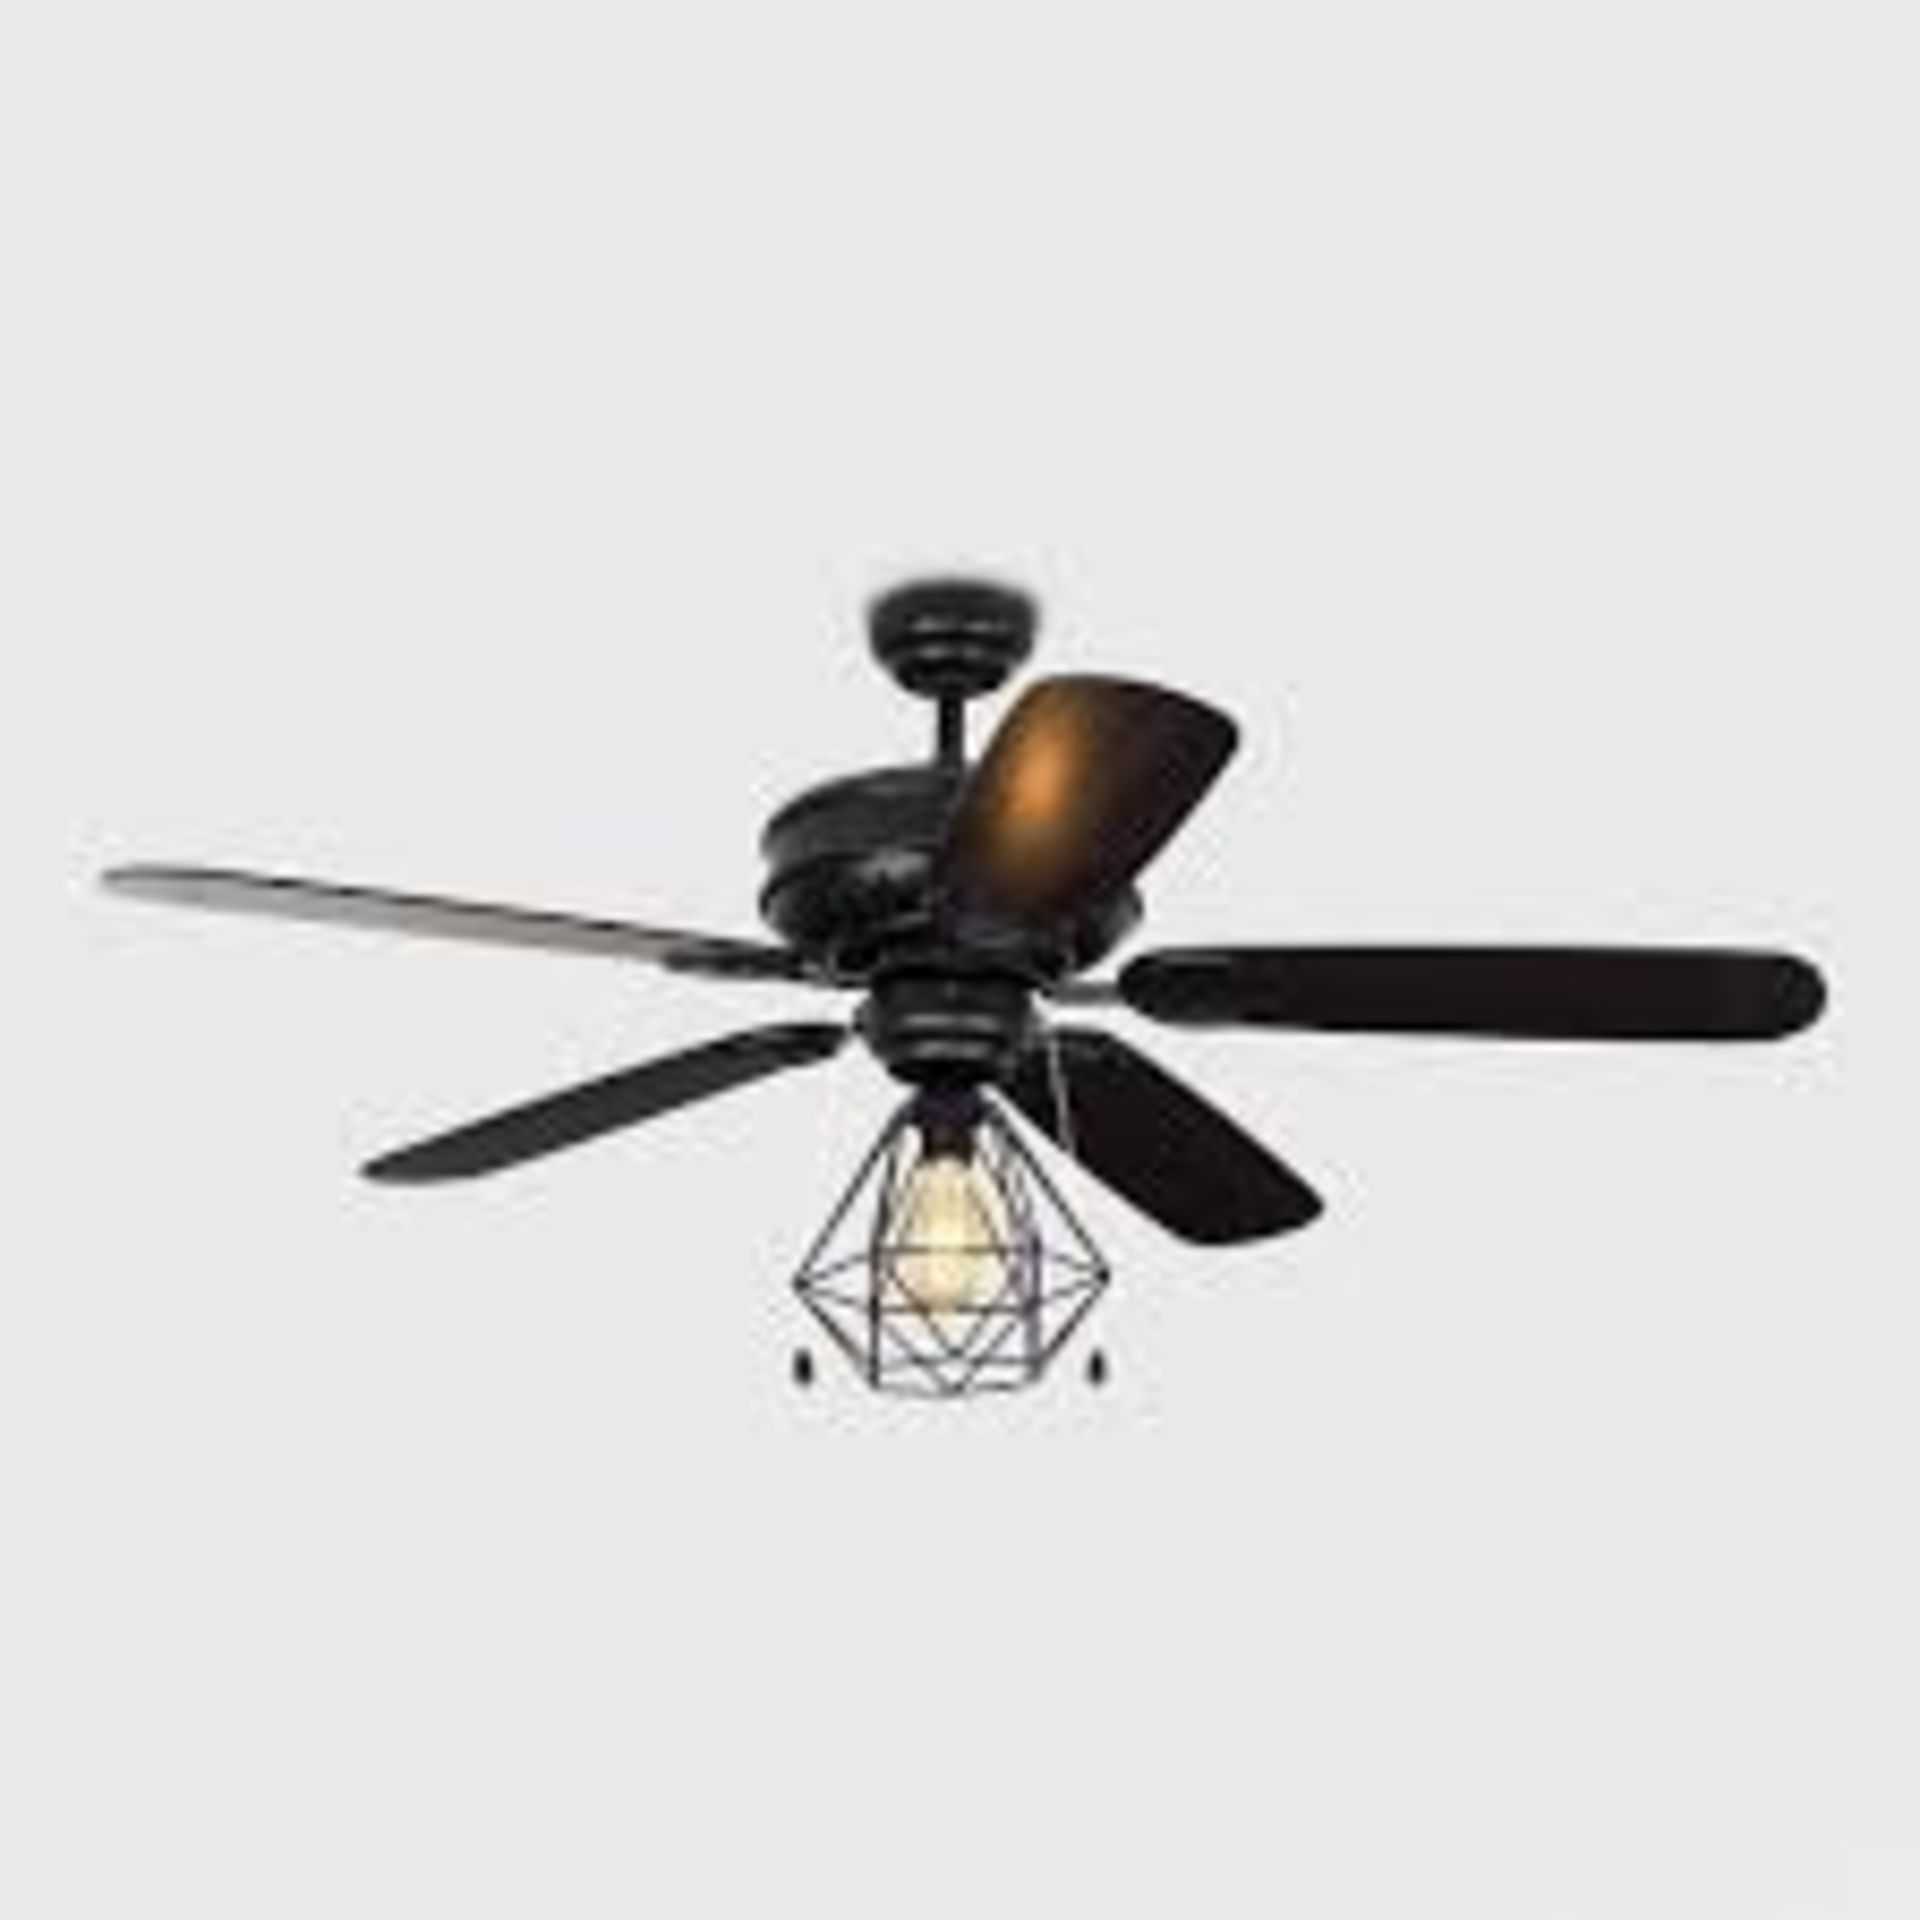 Boxed Evanston Black Steampunk 52Inch Ceiling Light Fan (Viewing/Appraisals Highly Recommended)